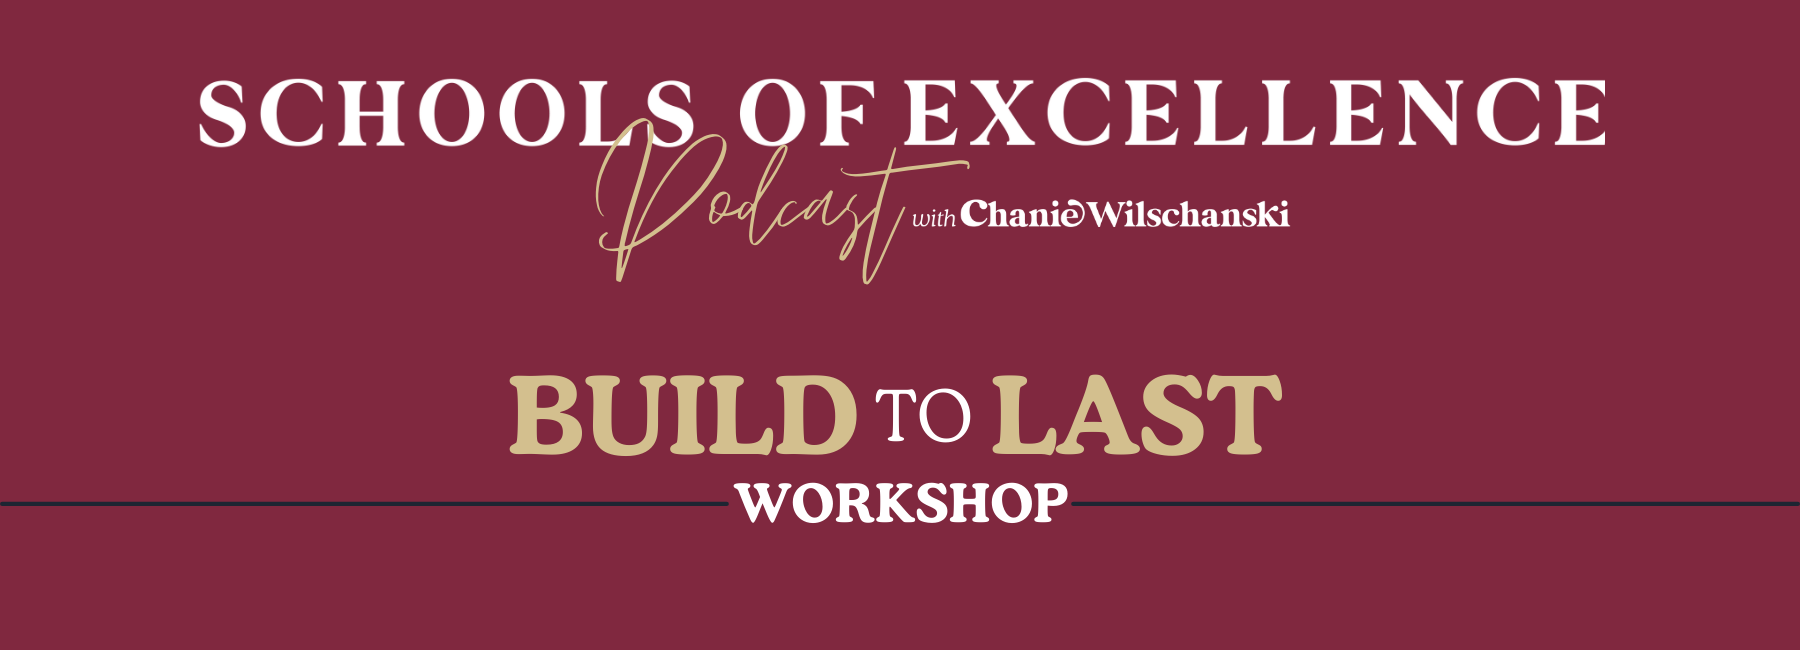 Build to Last: How to Build a Culture of Excellence